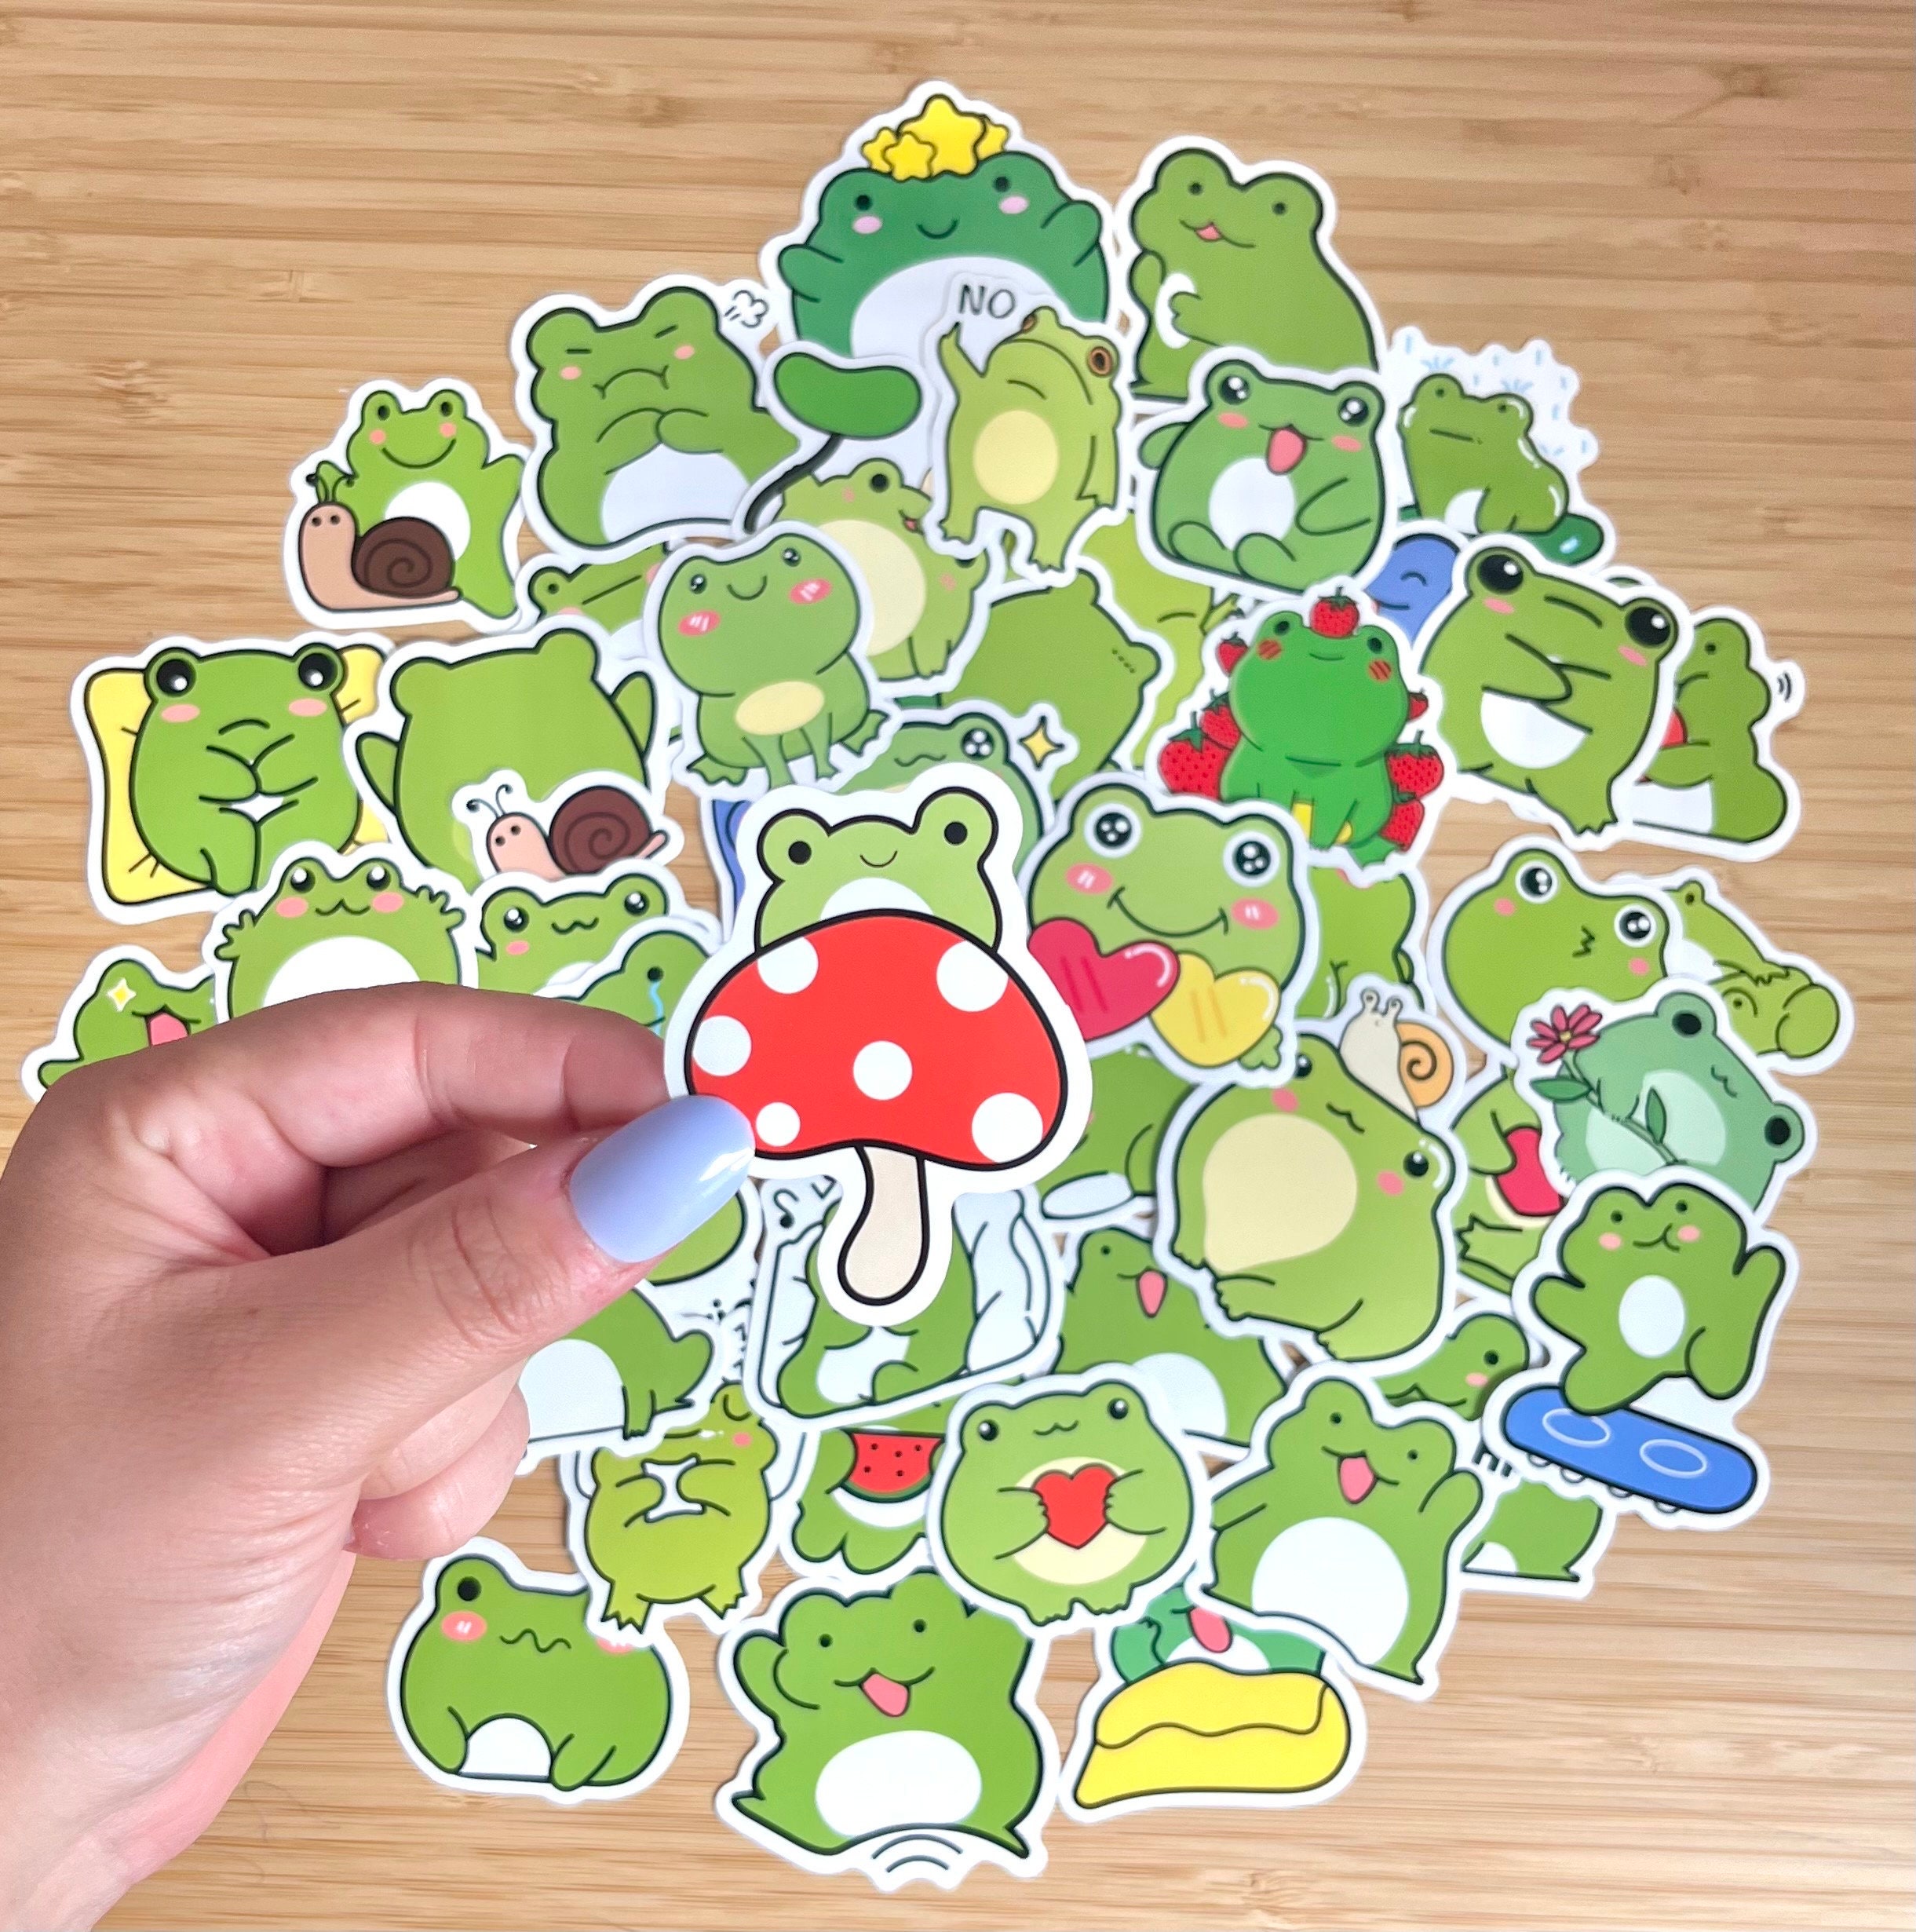 Frog-o's Froggy Cereal Glossy or Holo Sticker Frogs Holo -  UK